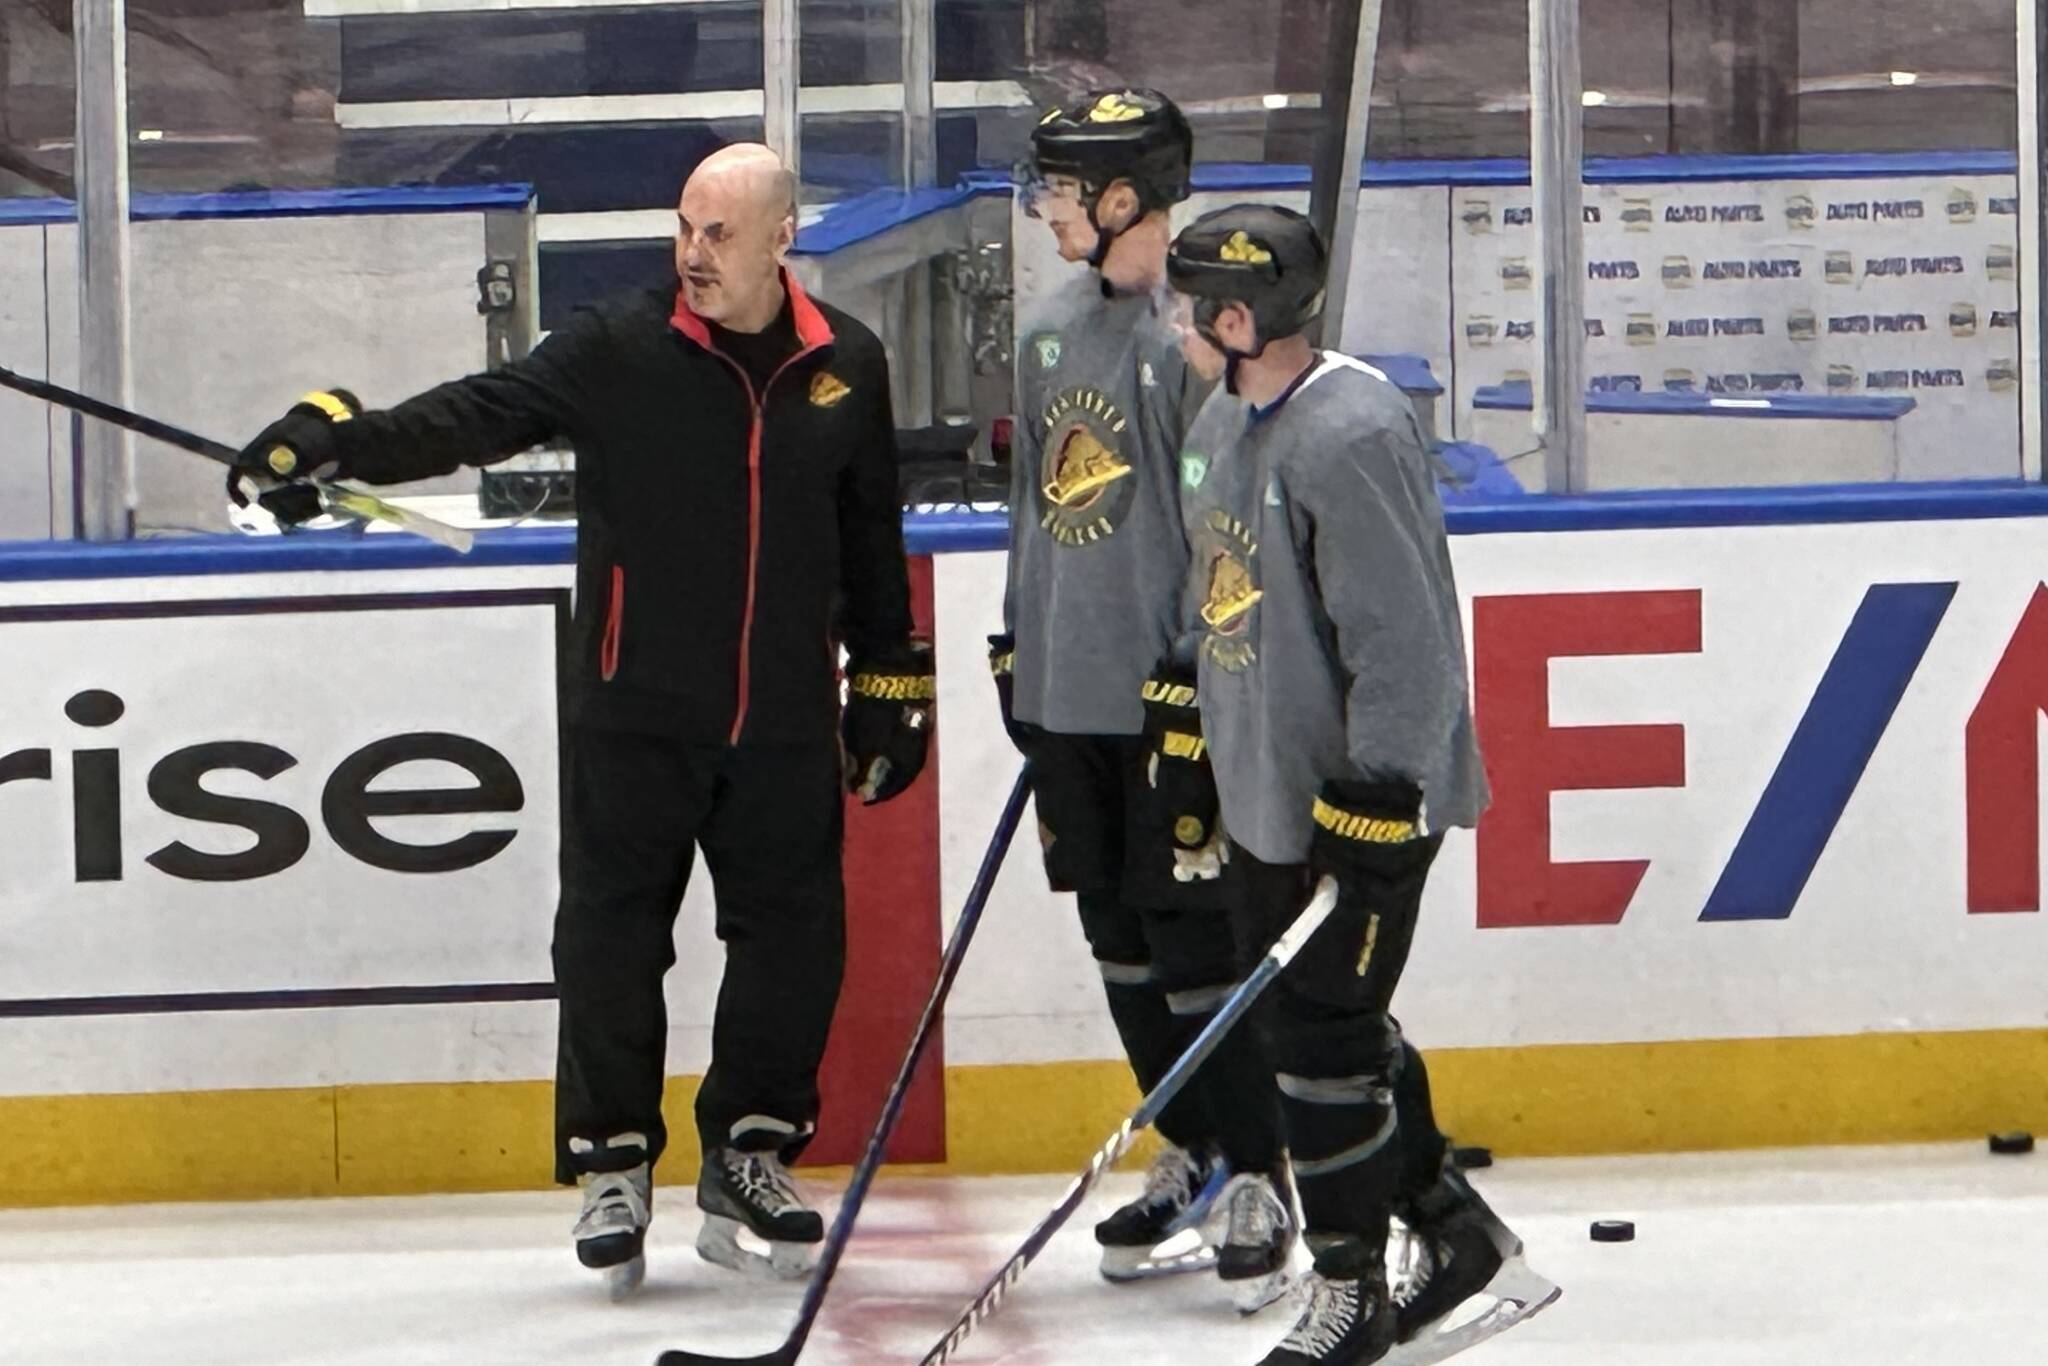 Practice is a valuable tool for Rick Tocchet and the Canucks. Photo courtesy Vancouver Canucks